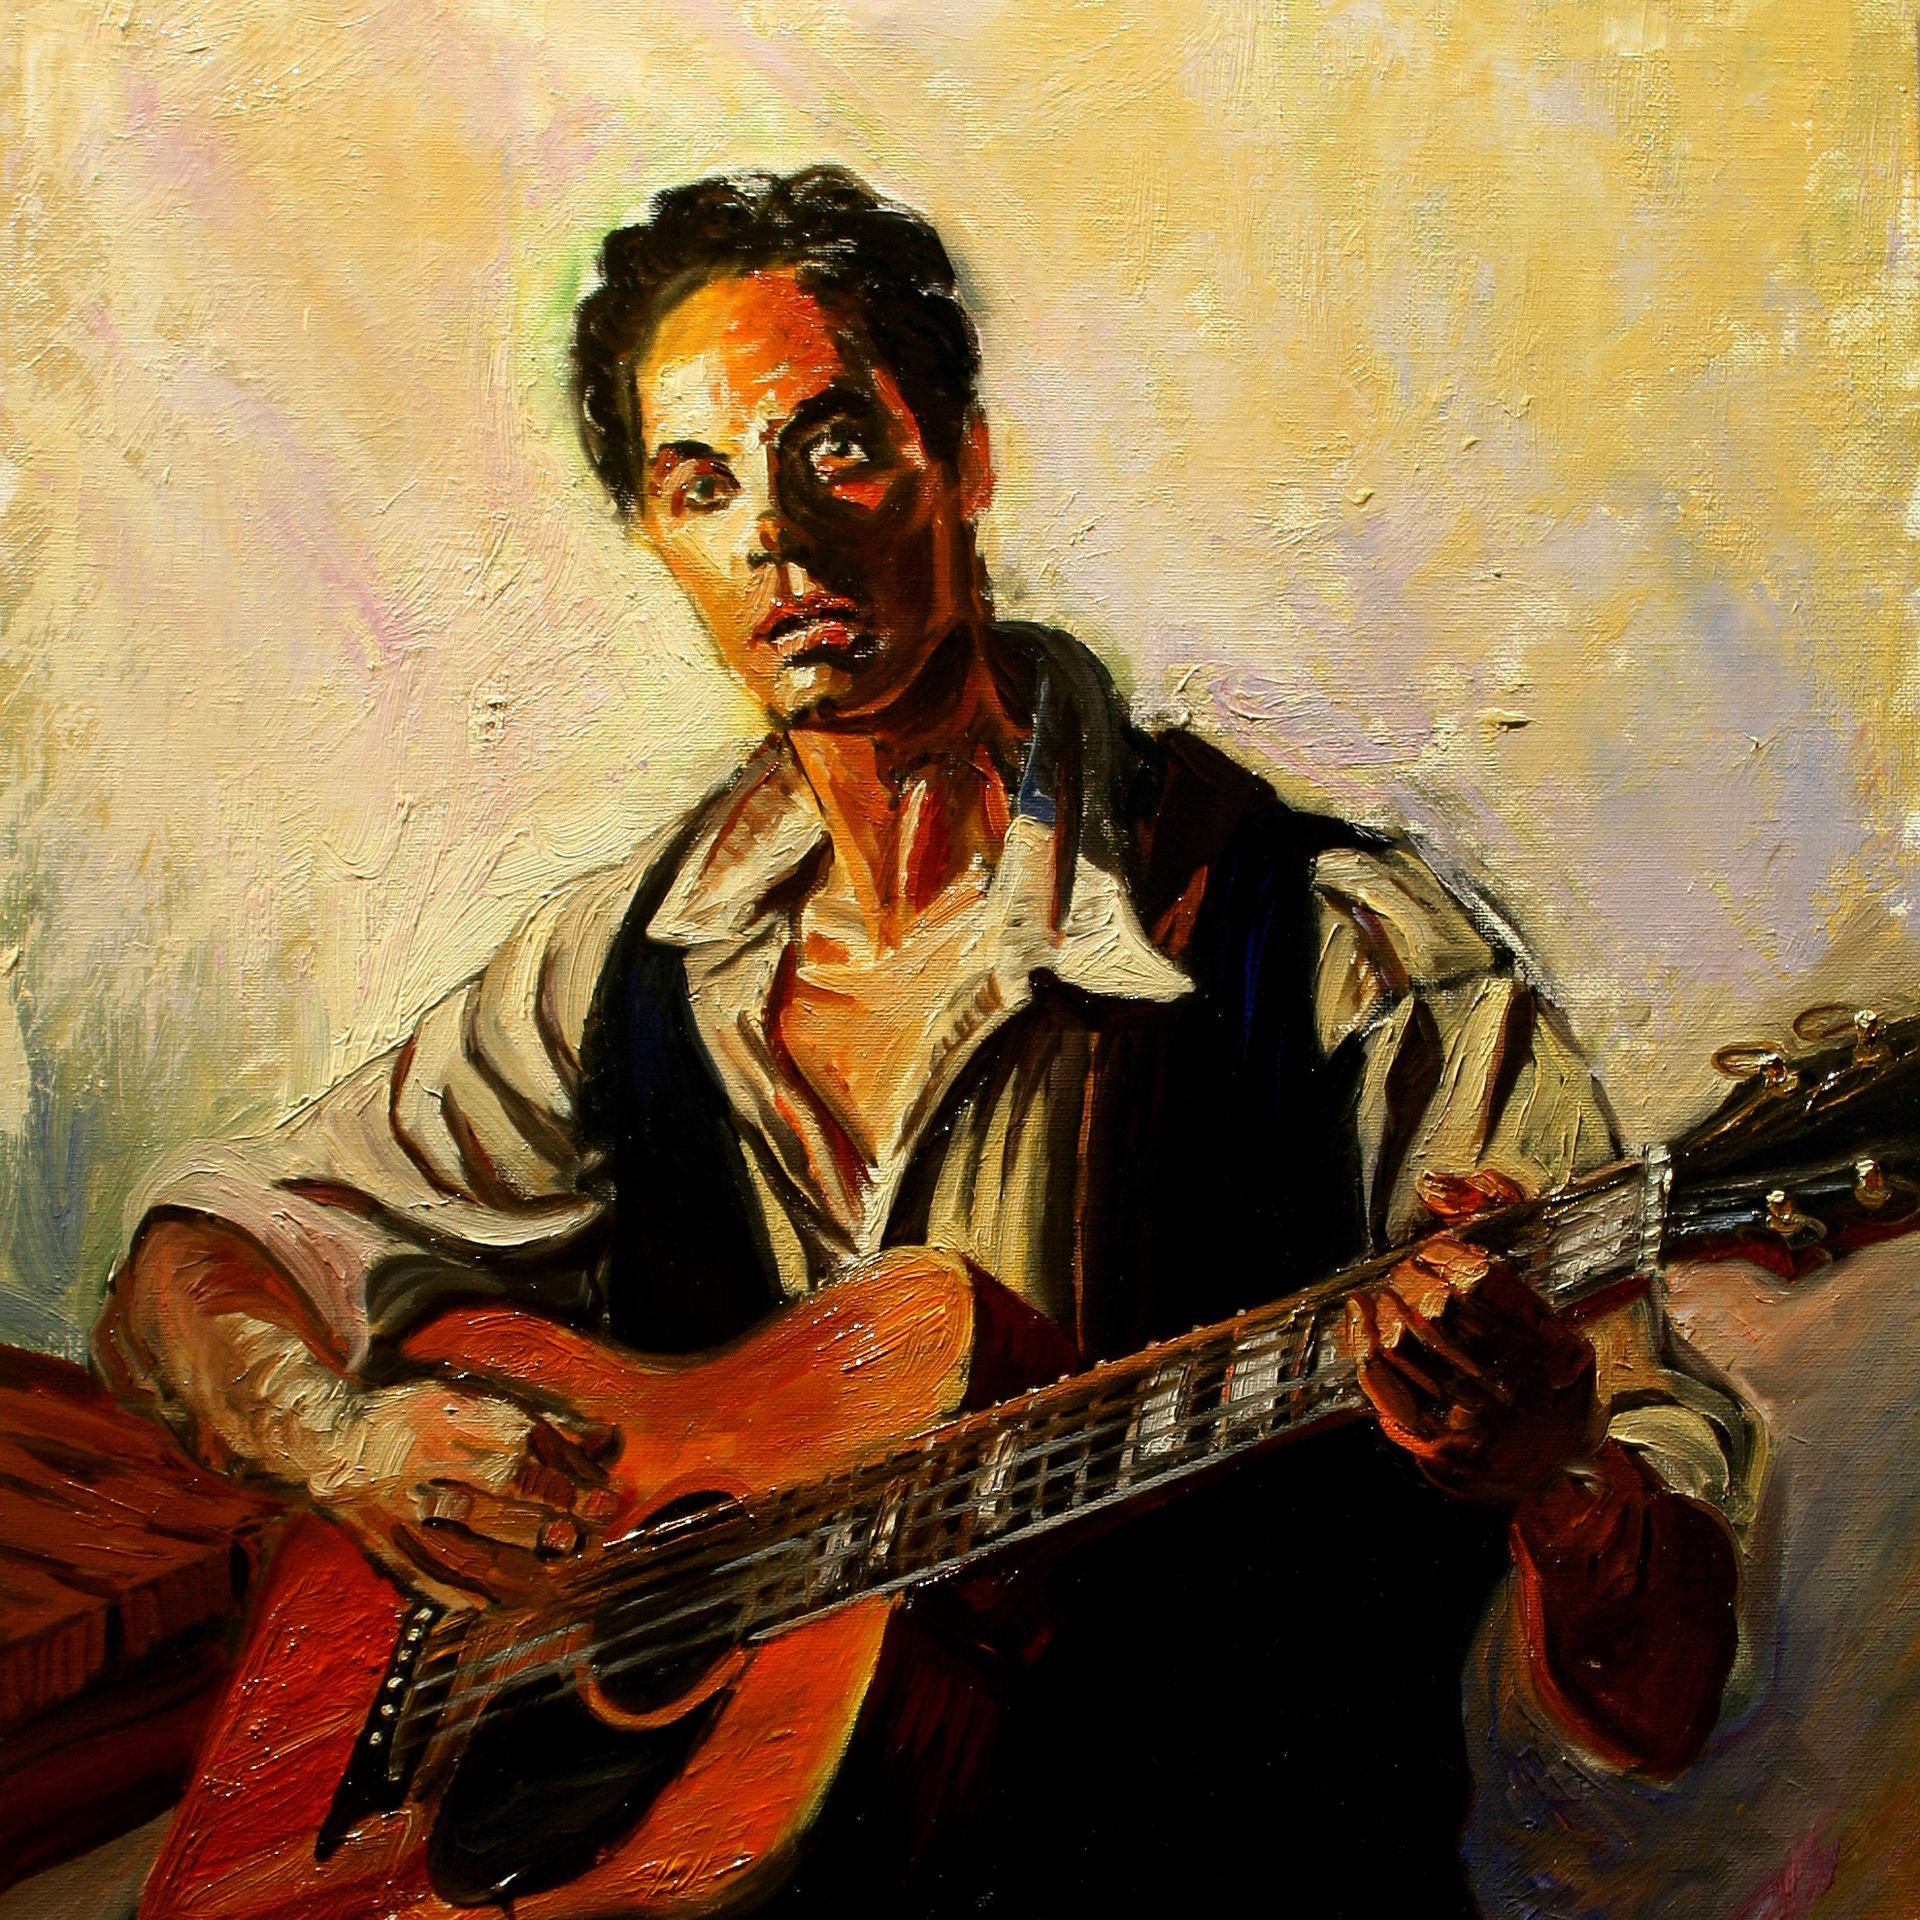 The Folk Singer | Figurative Oil Painting by John Varriano